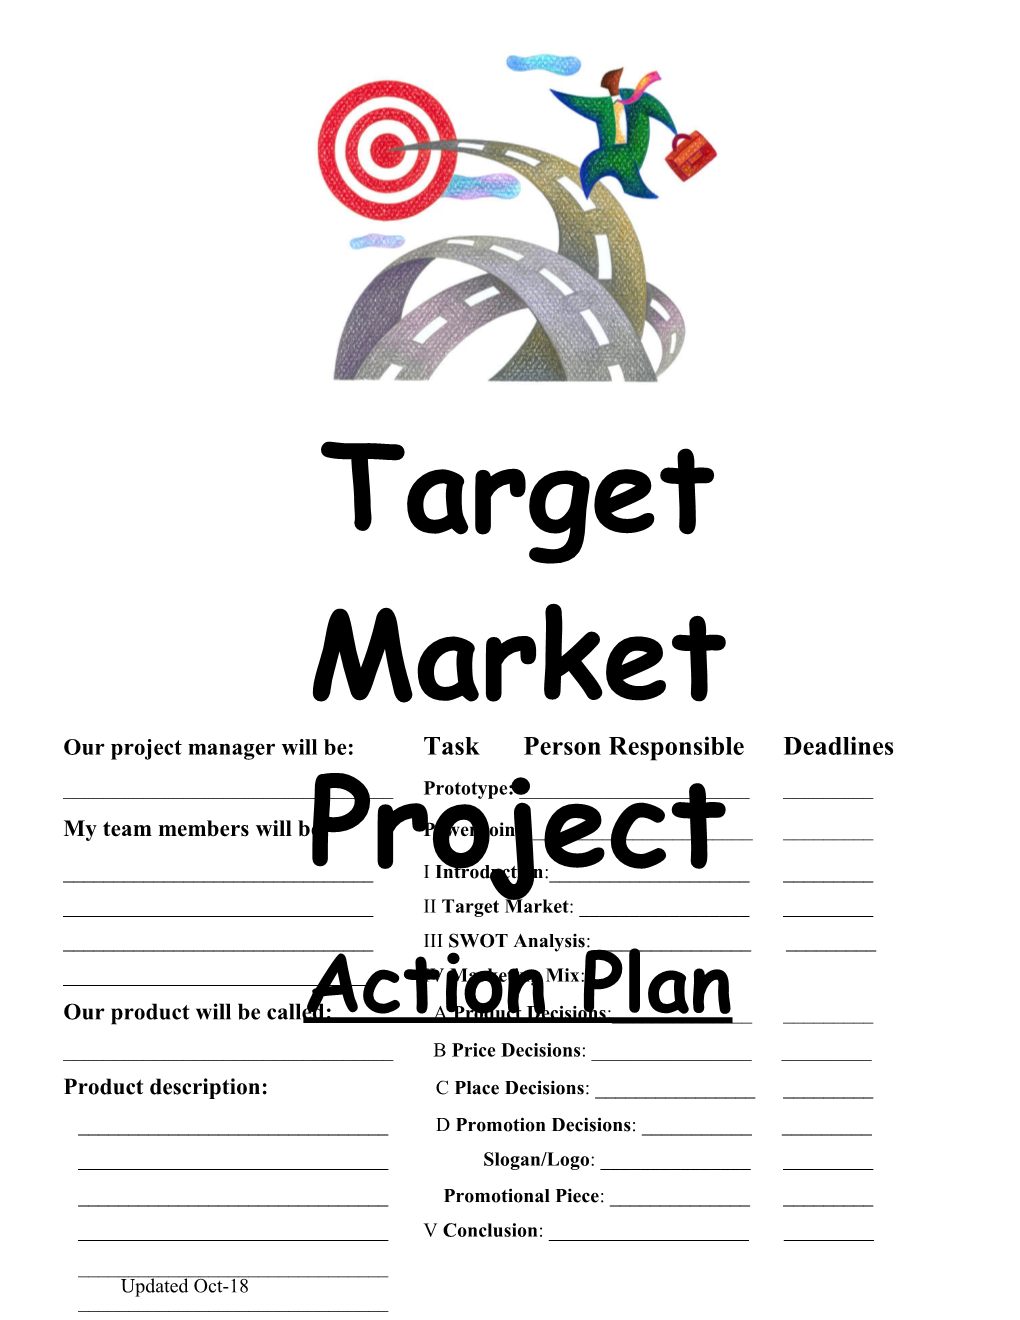 Overview: Your Group Will Develop a Marketing Mix Plan for a New Product; Have Fun With